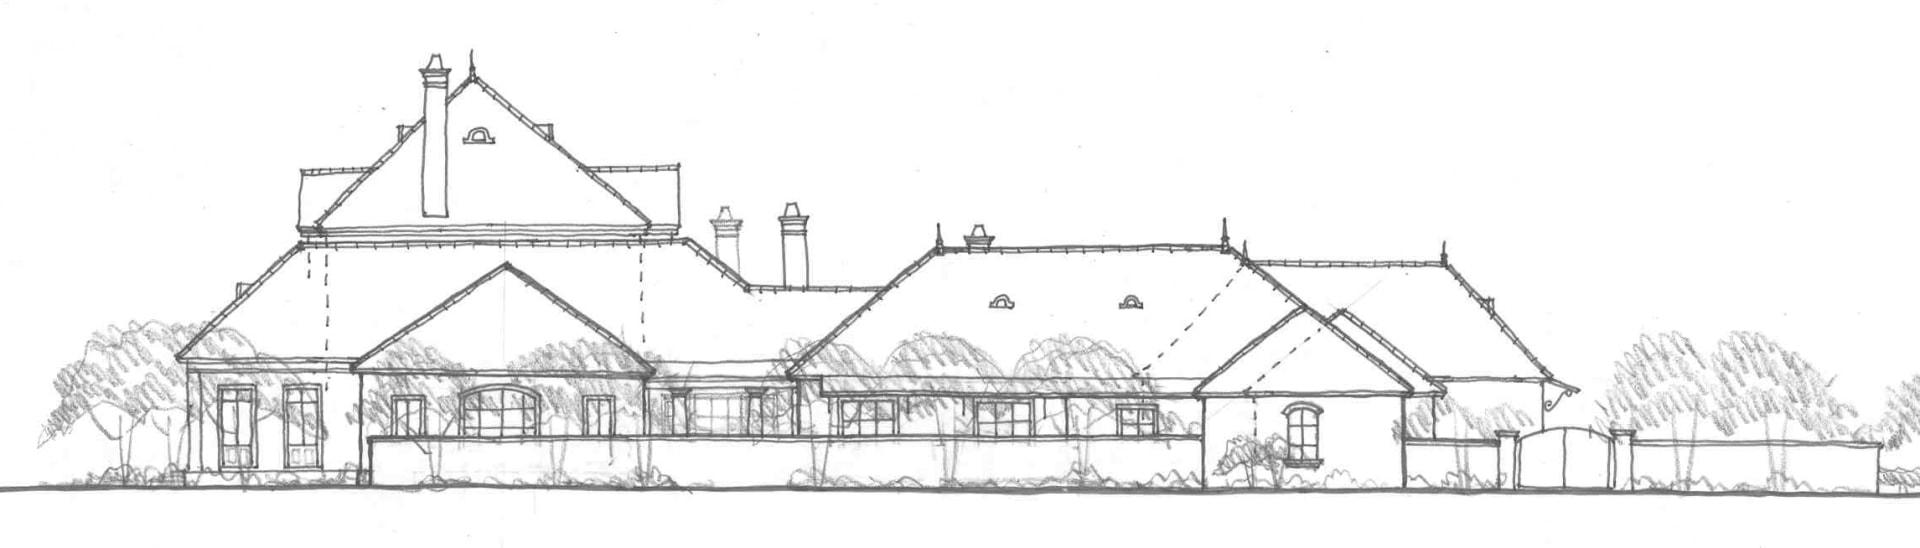 Rendering of house built in the French Renaissance architectural style. Designed by Cockfield Jackson Architects.